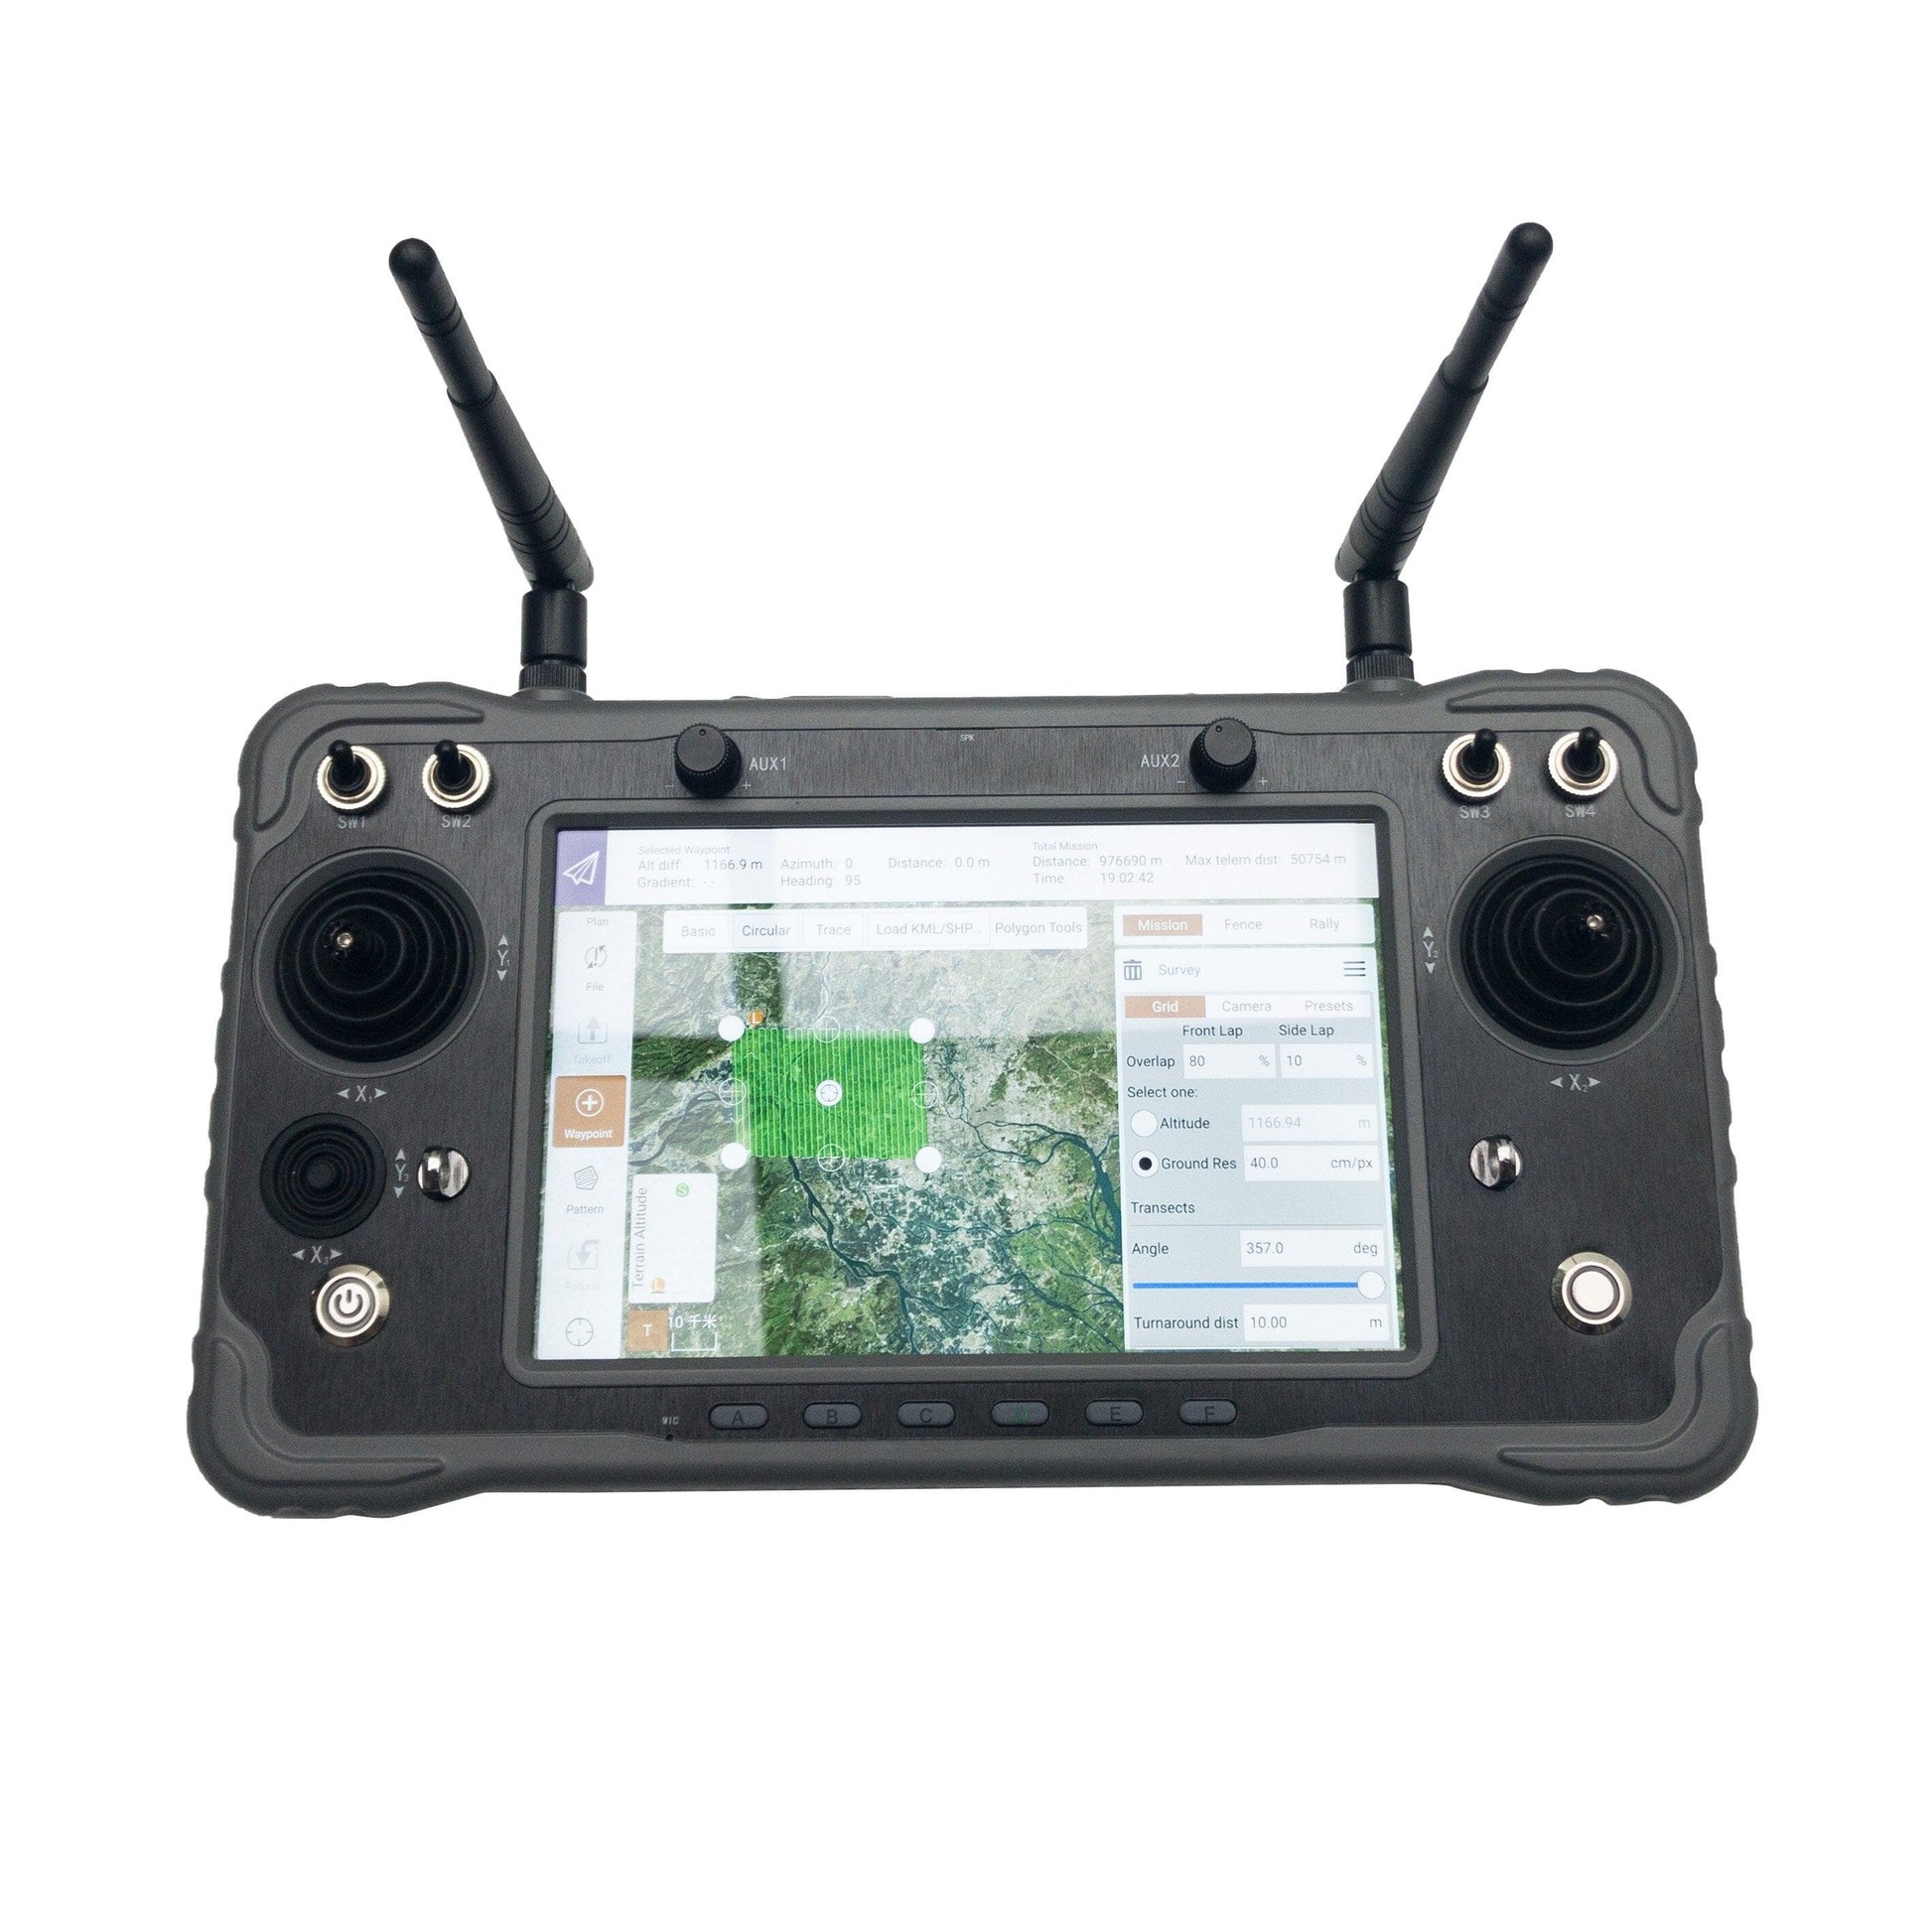 CUAV Black H16 HD 10km Video Transmission Telemetry Agriculture Spraying HDMI RC Drone Parts Mapping Remote Controller